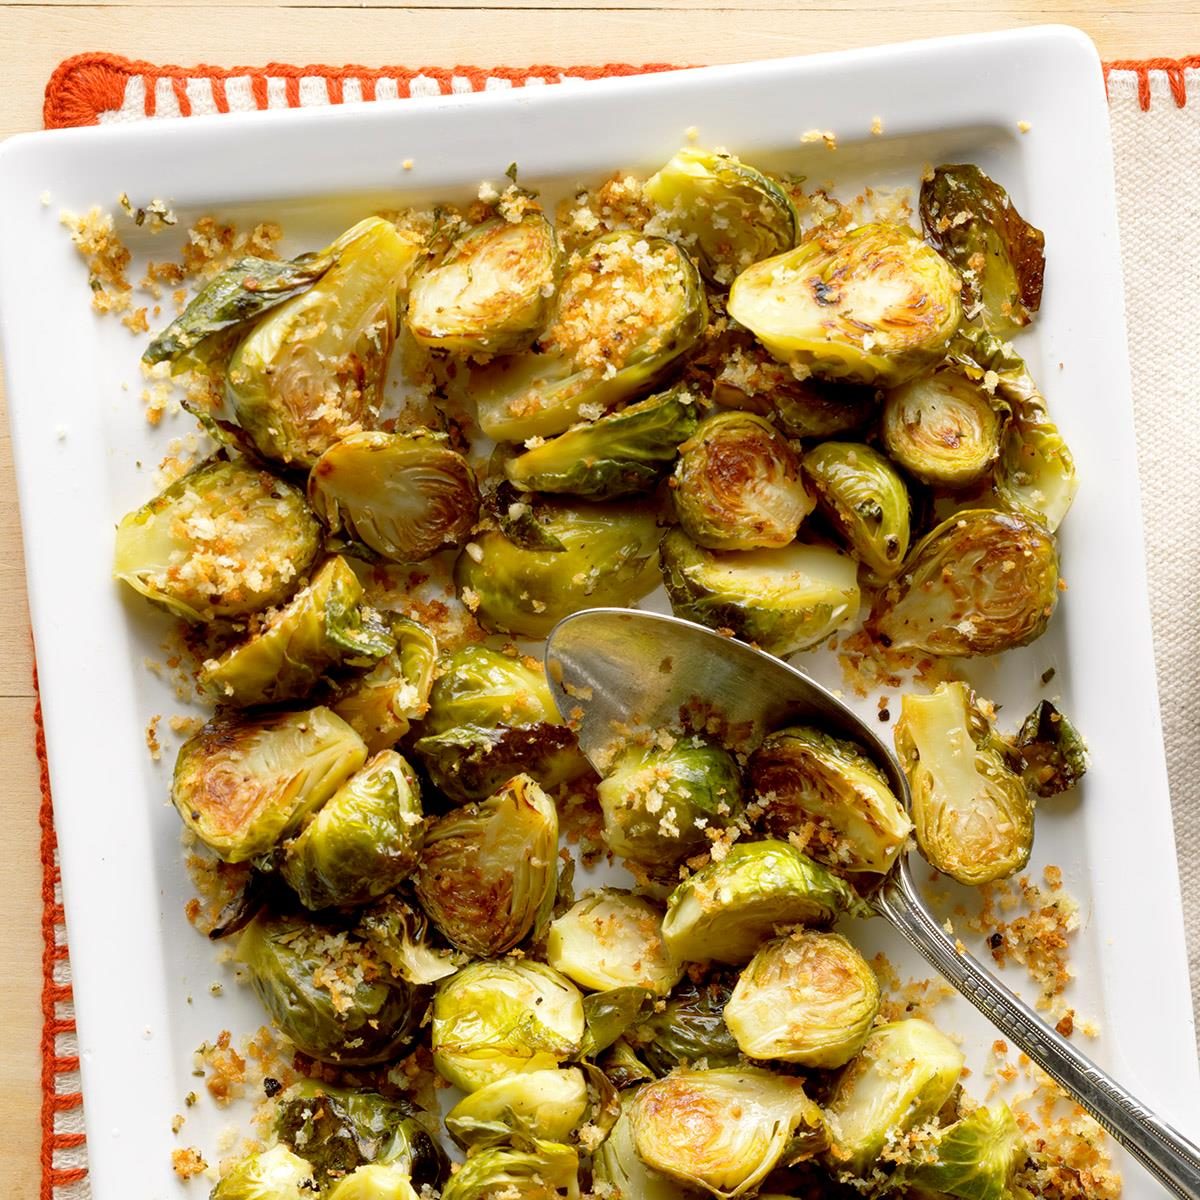 Garlic-Rosemary Brussels Sprouts